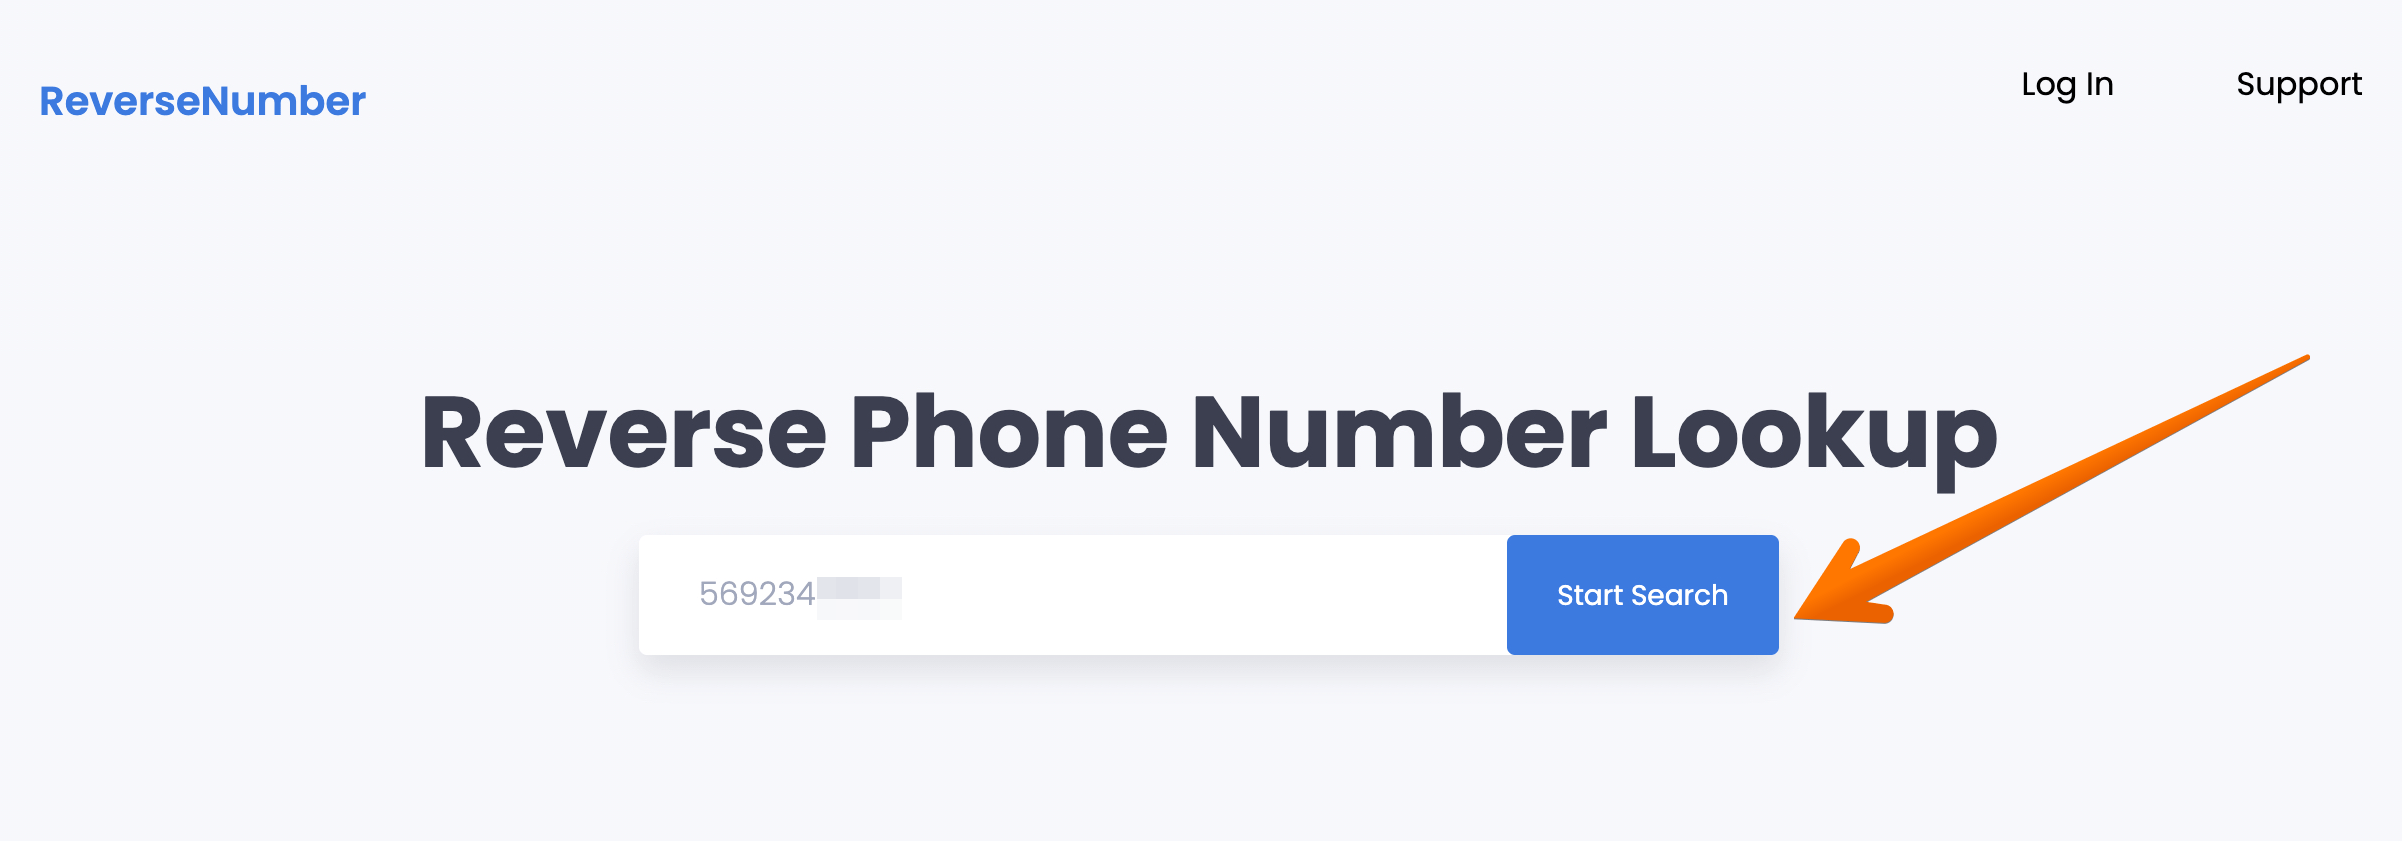 Enter your phone number and click the "Start Search" button